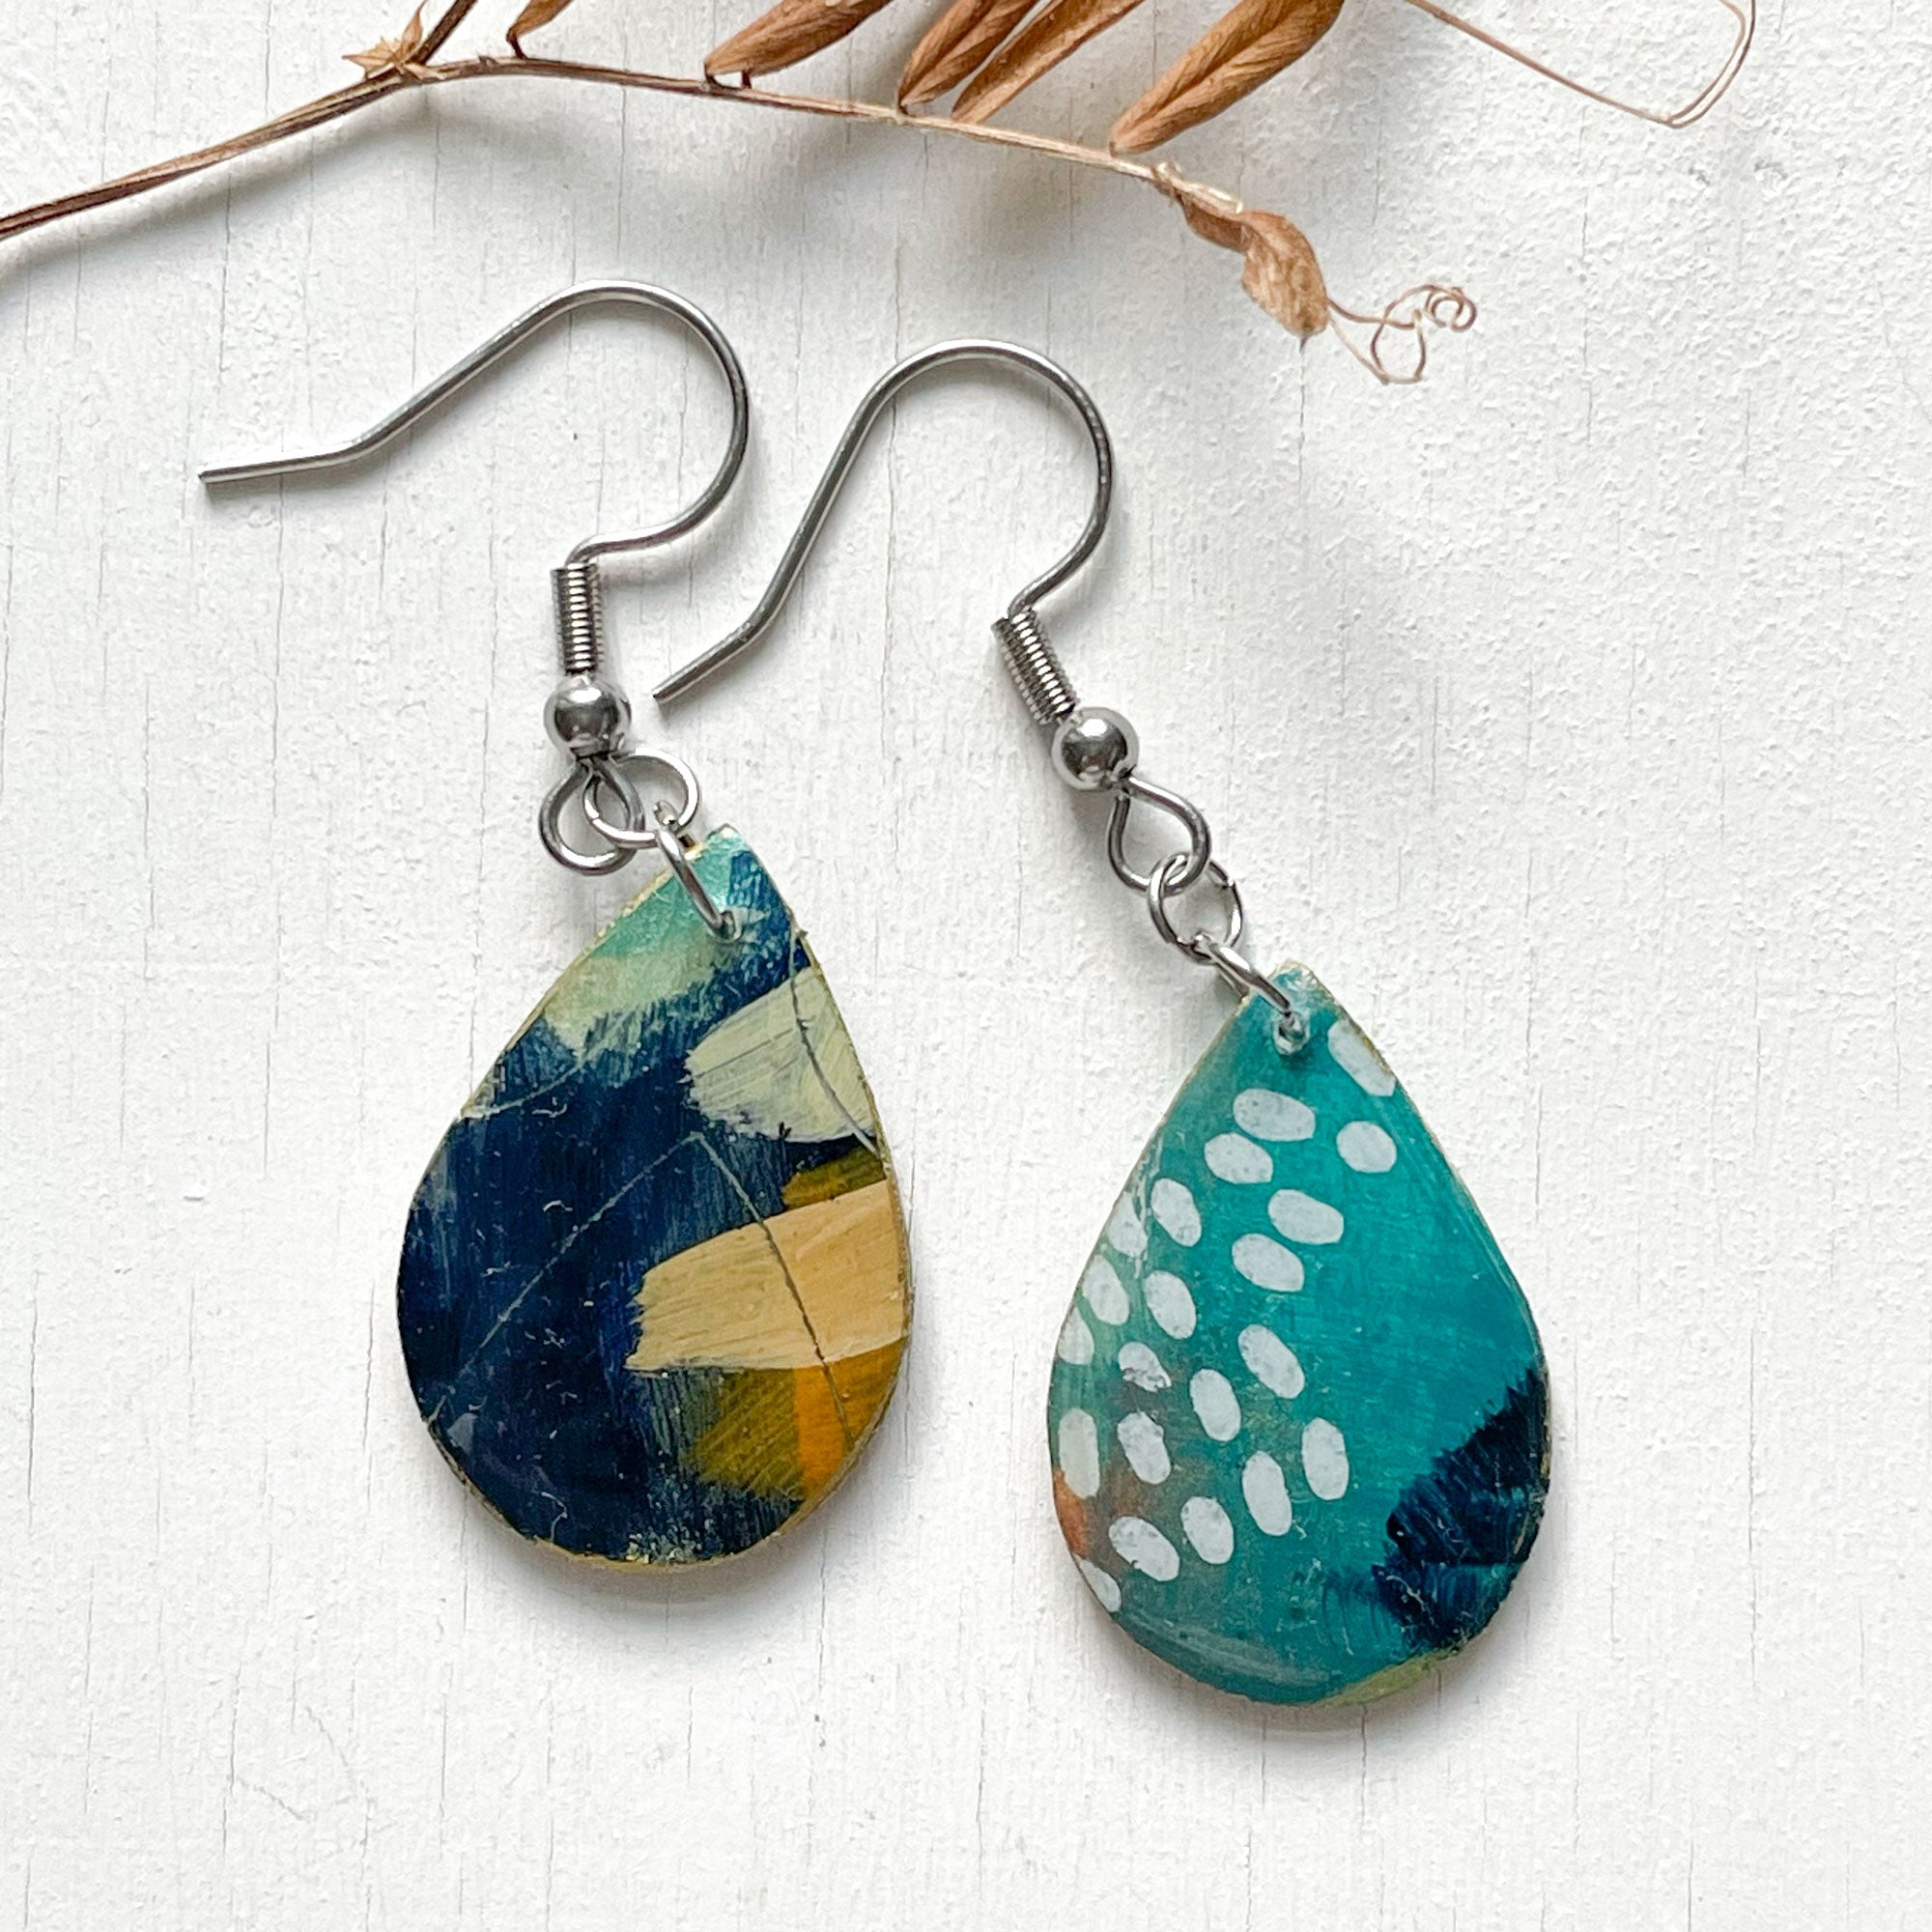 Hand Painted Paper and Resin Earrings - #10